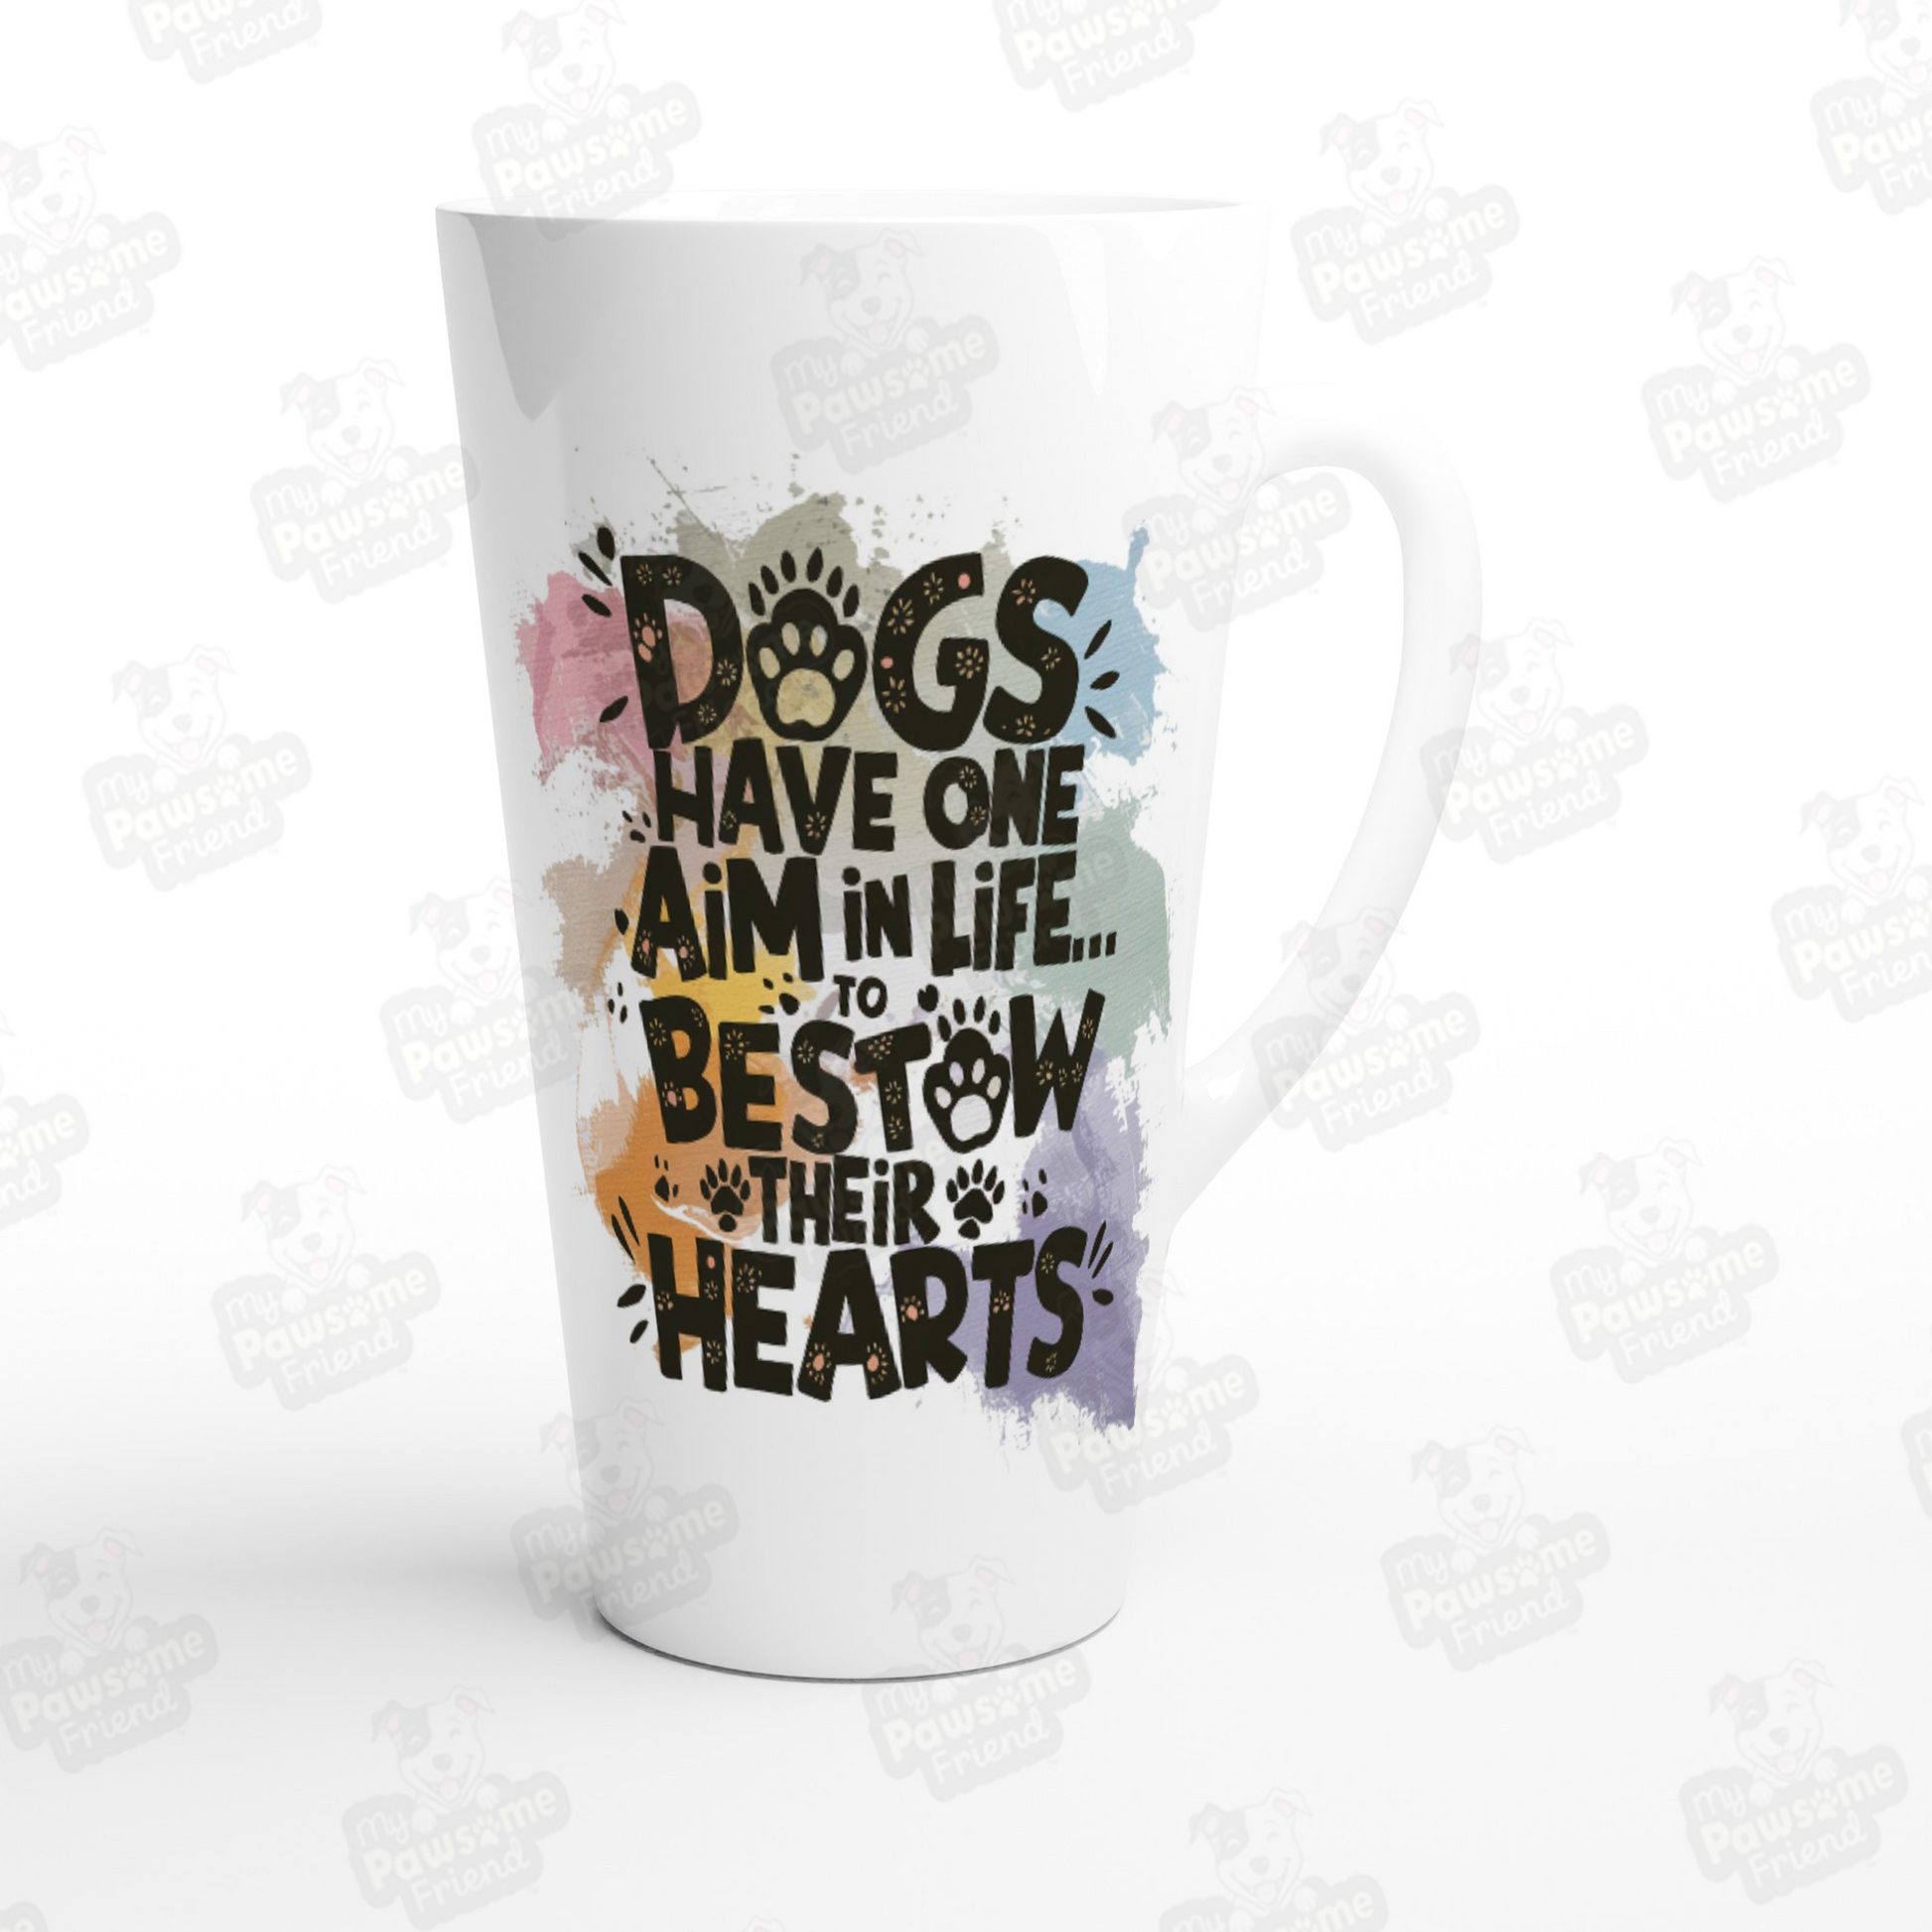 Dogs Have One Aim in Life... To Bestow Their Hearts Latte Mug sideview